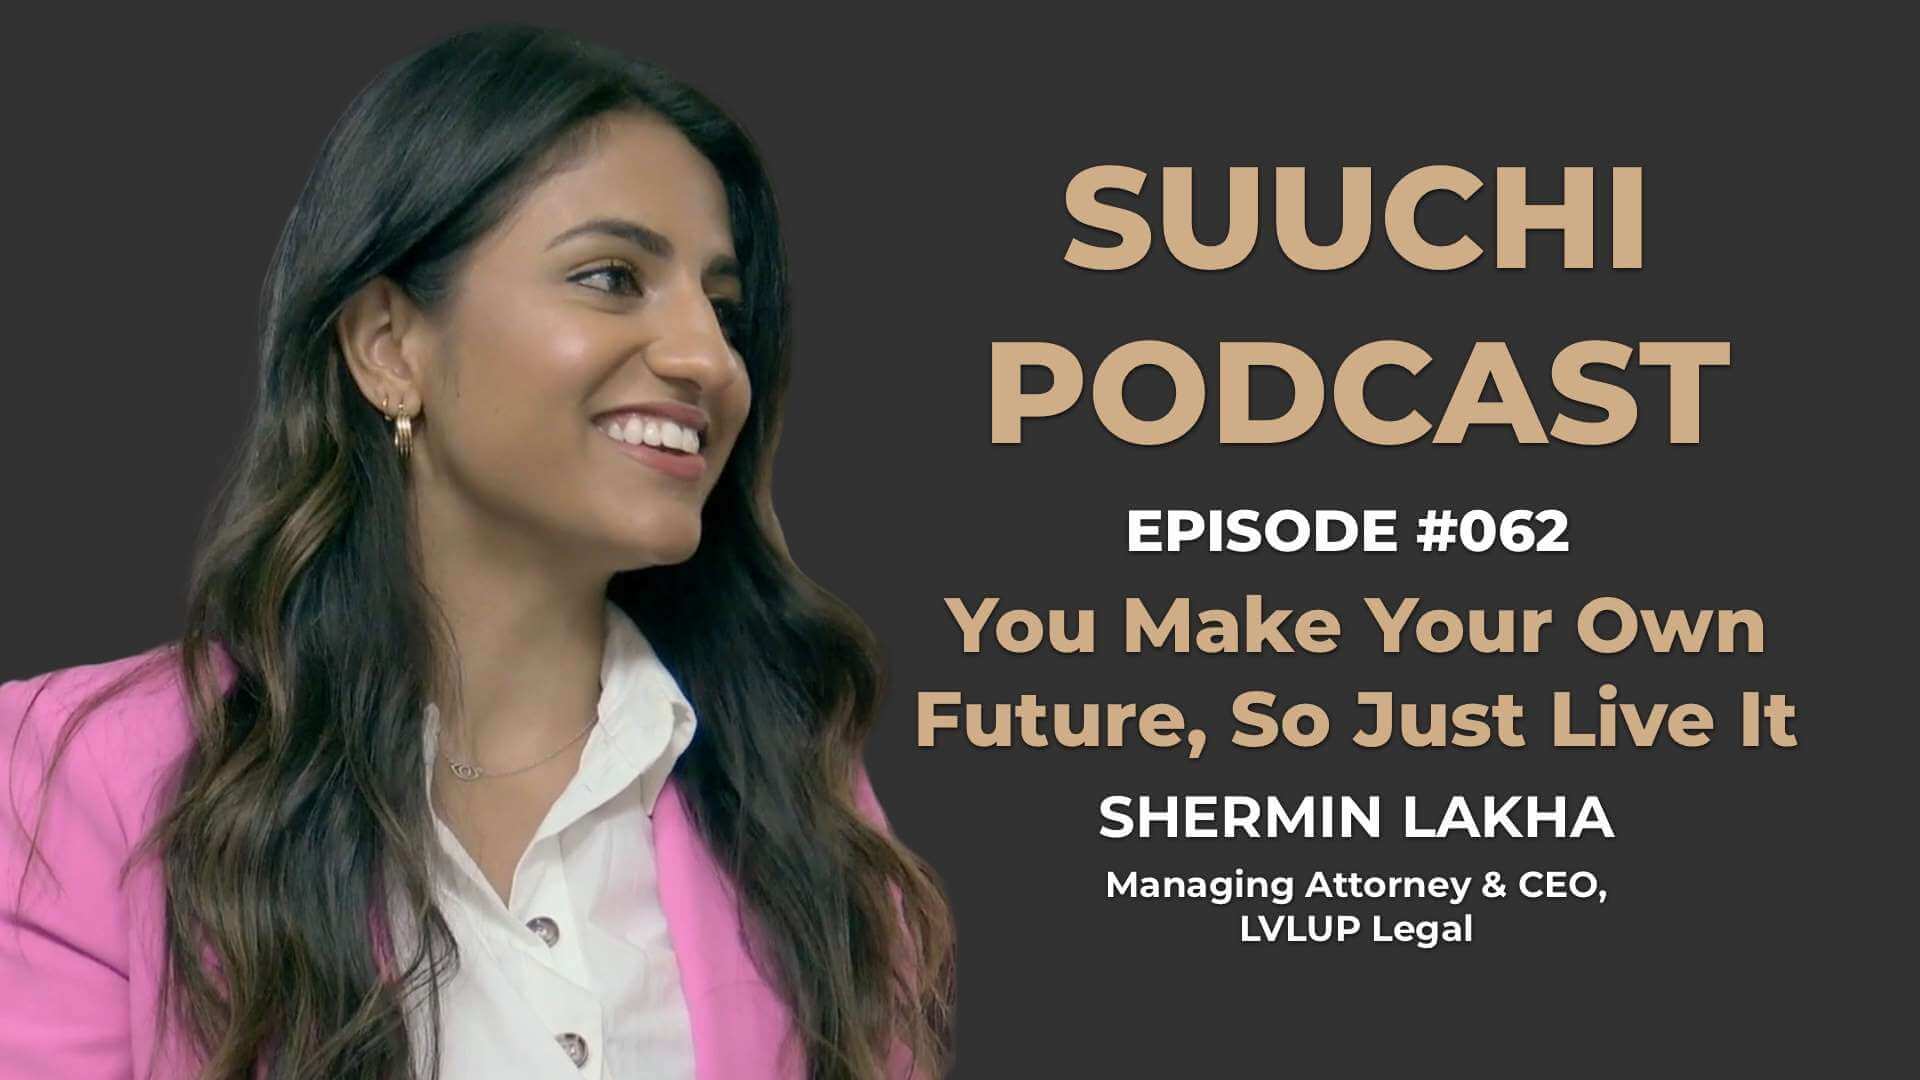 Suuchi Podcast #62: Shermin Lakha, Managing Attorney & CEO of LVLUP, - You Make Your Own Future & Life, So Just Live It